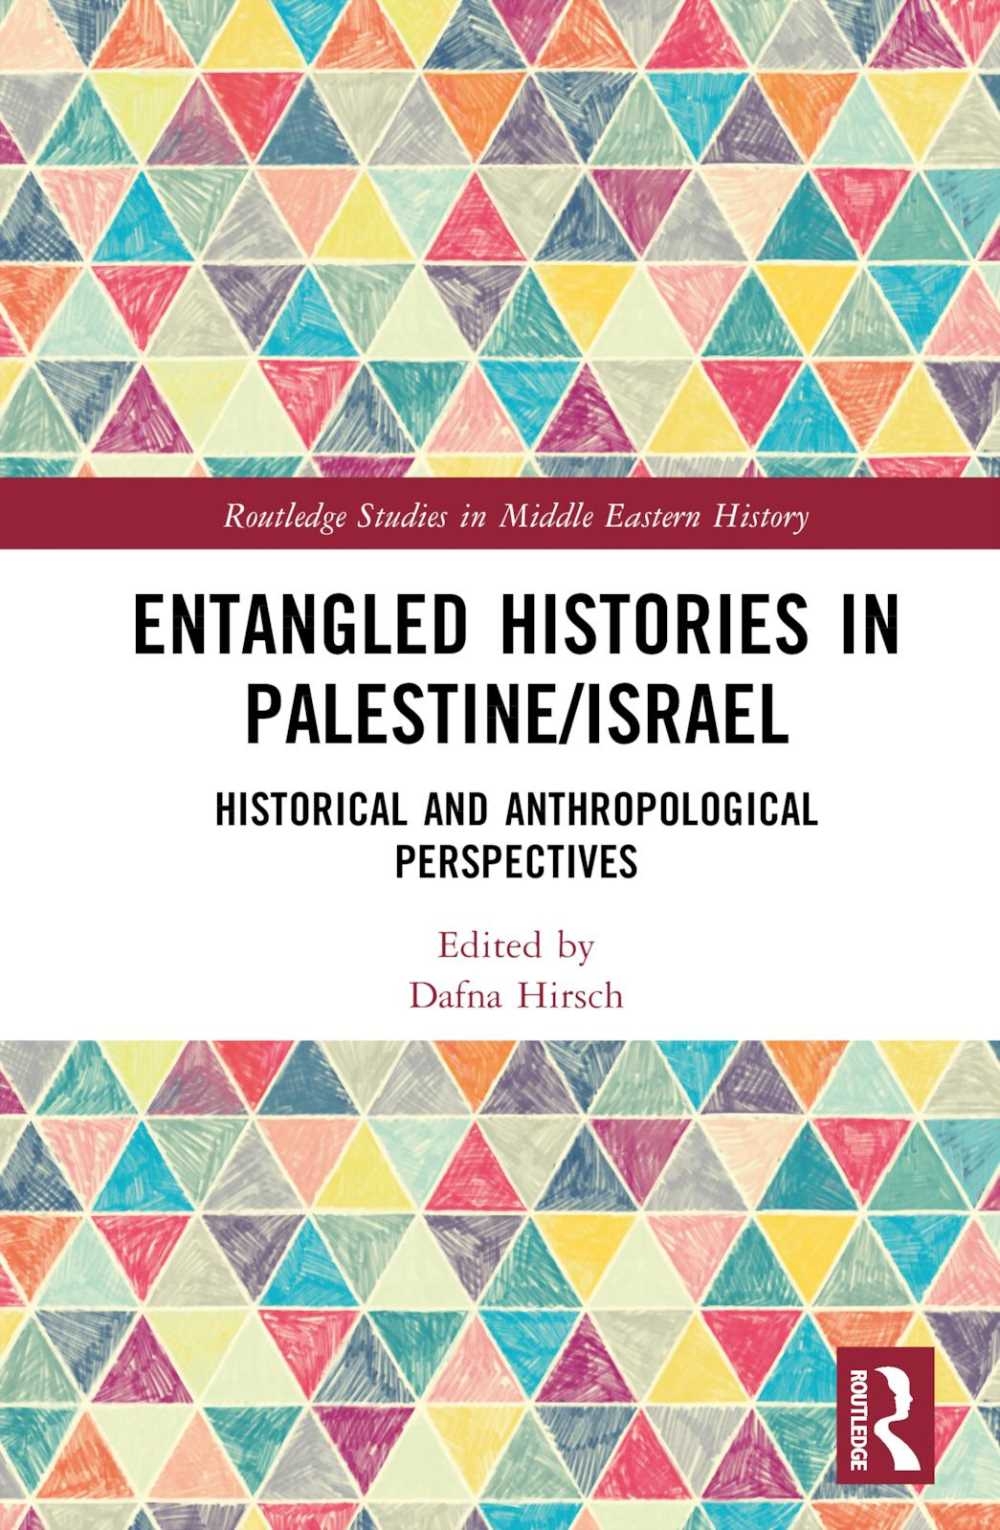 Entangled Histories in Palestine/Israel: Historical and Anthropological Perspectives